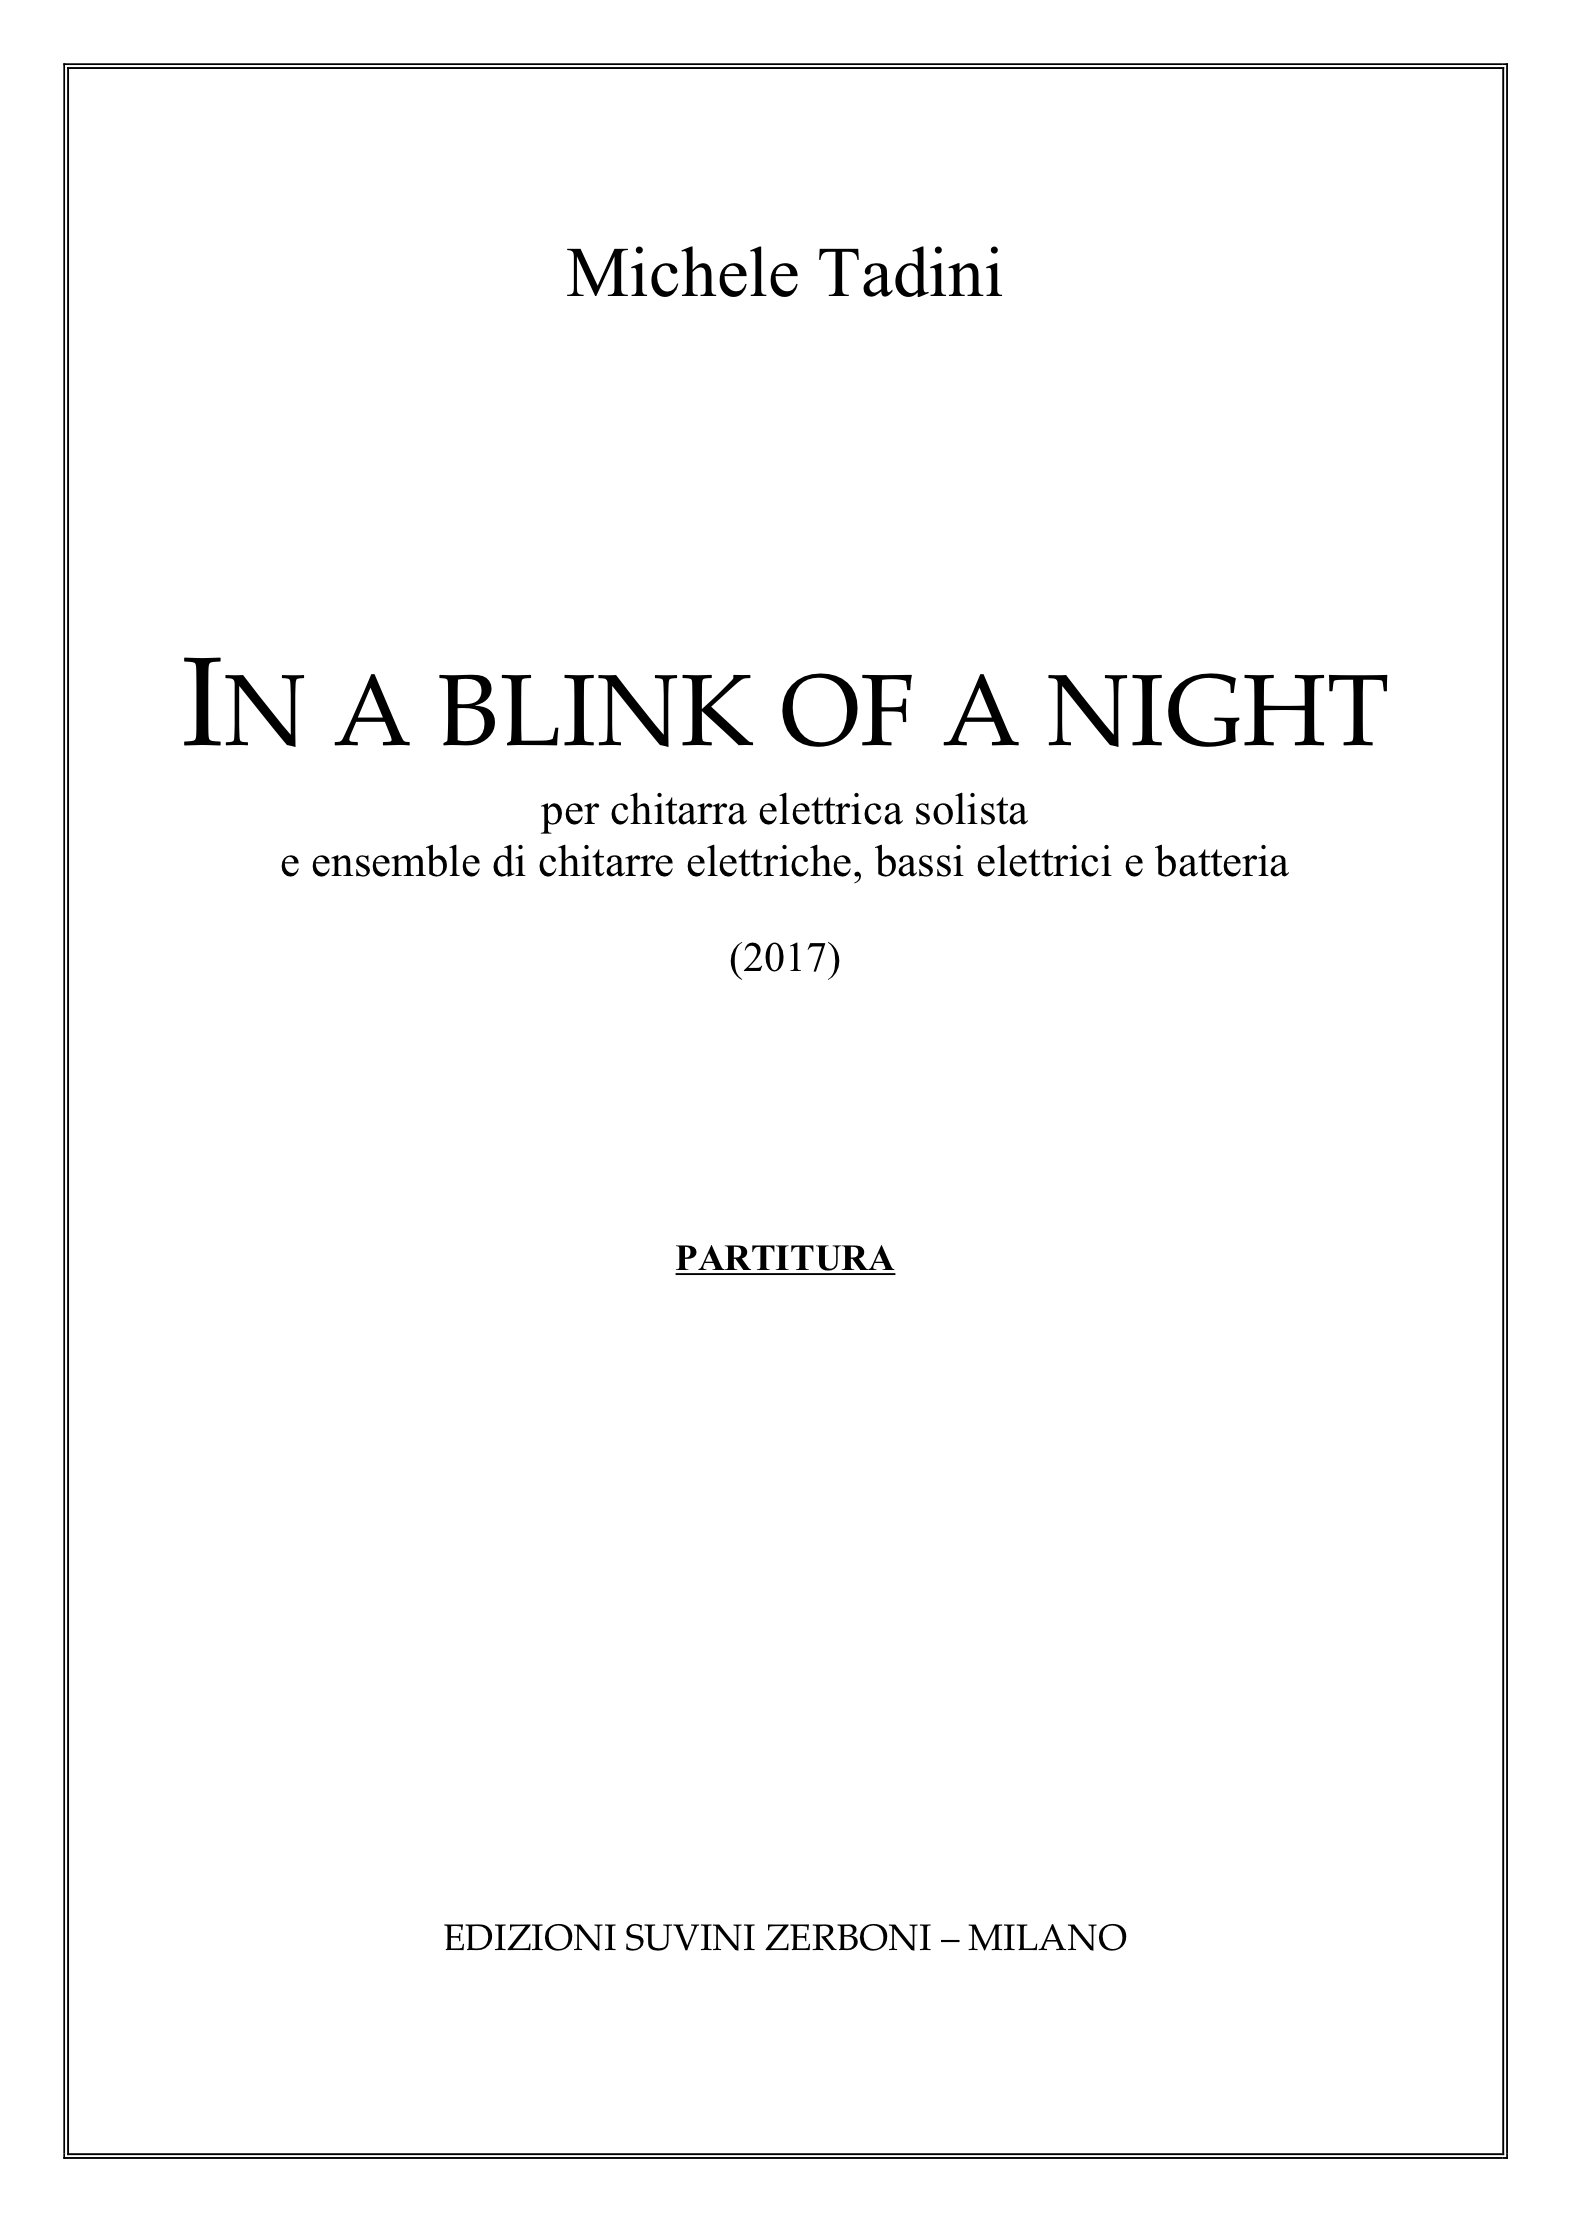 in a Blink of a night_Tadini 1